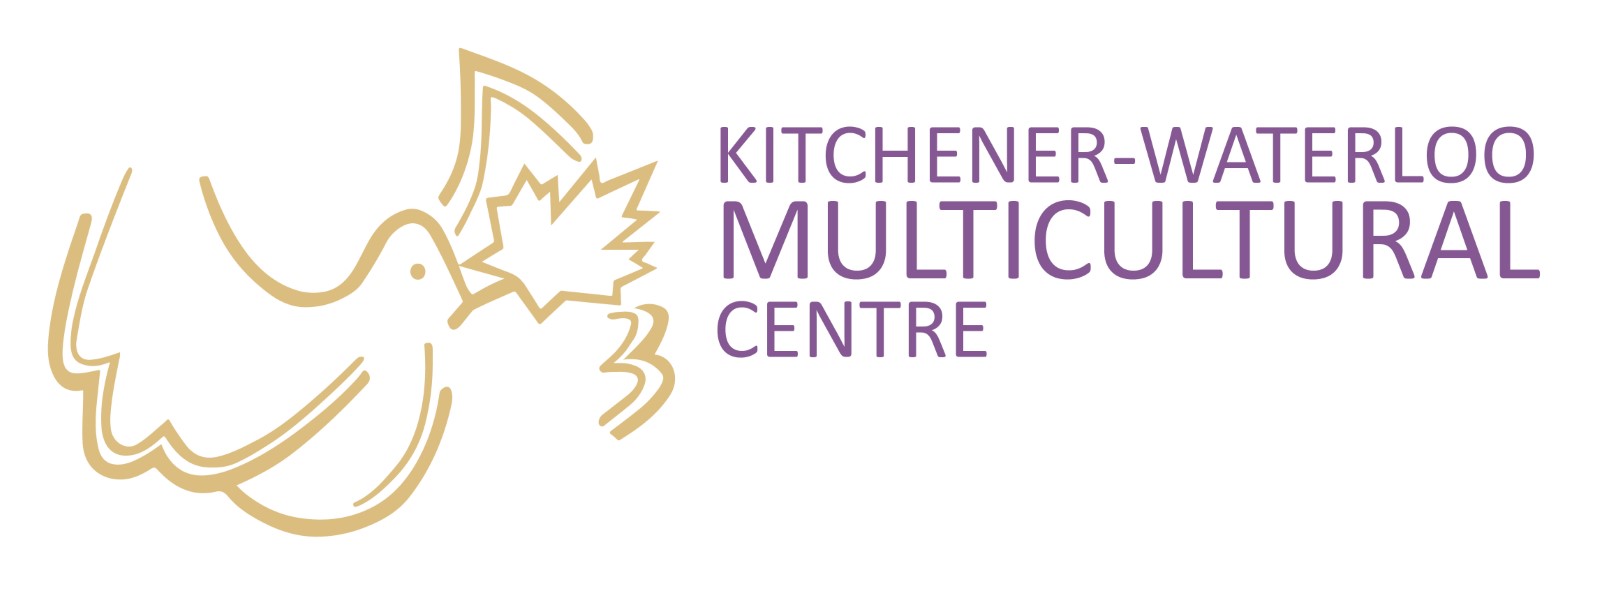 Showcase Image for Kitchener-Waterloo Multicultural Centre